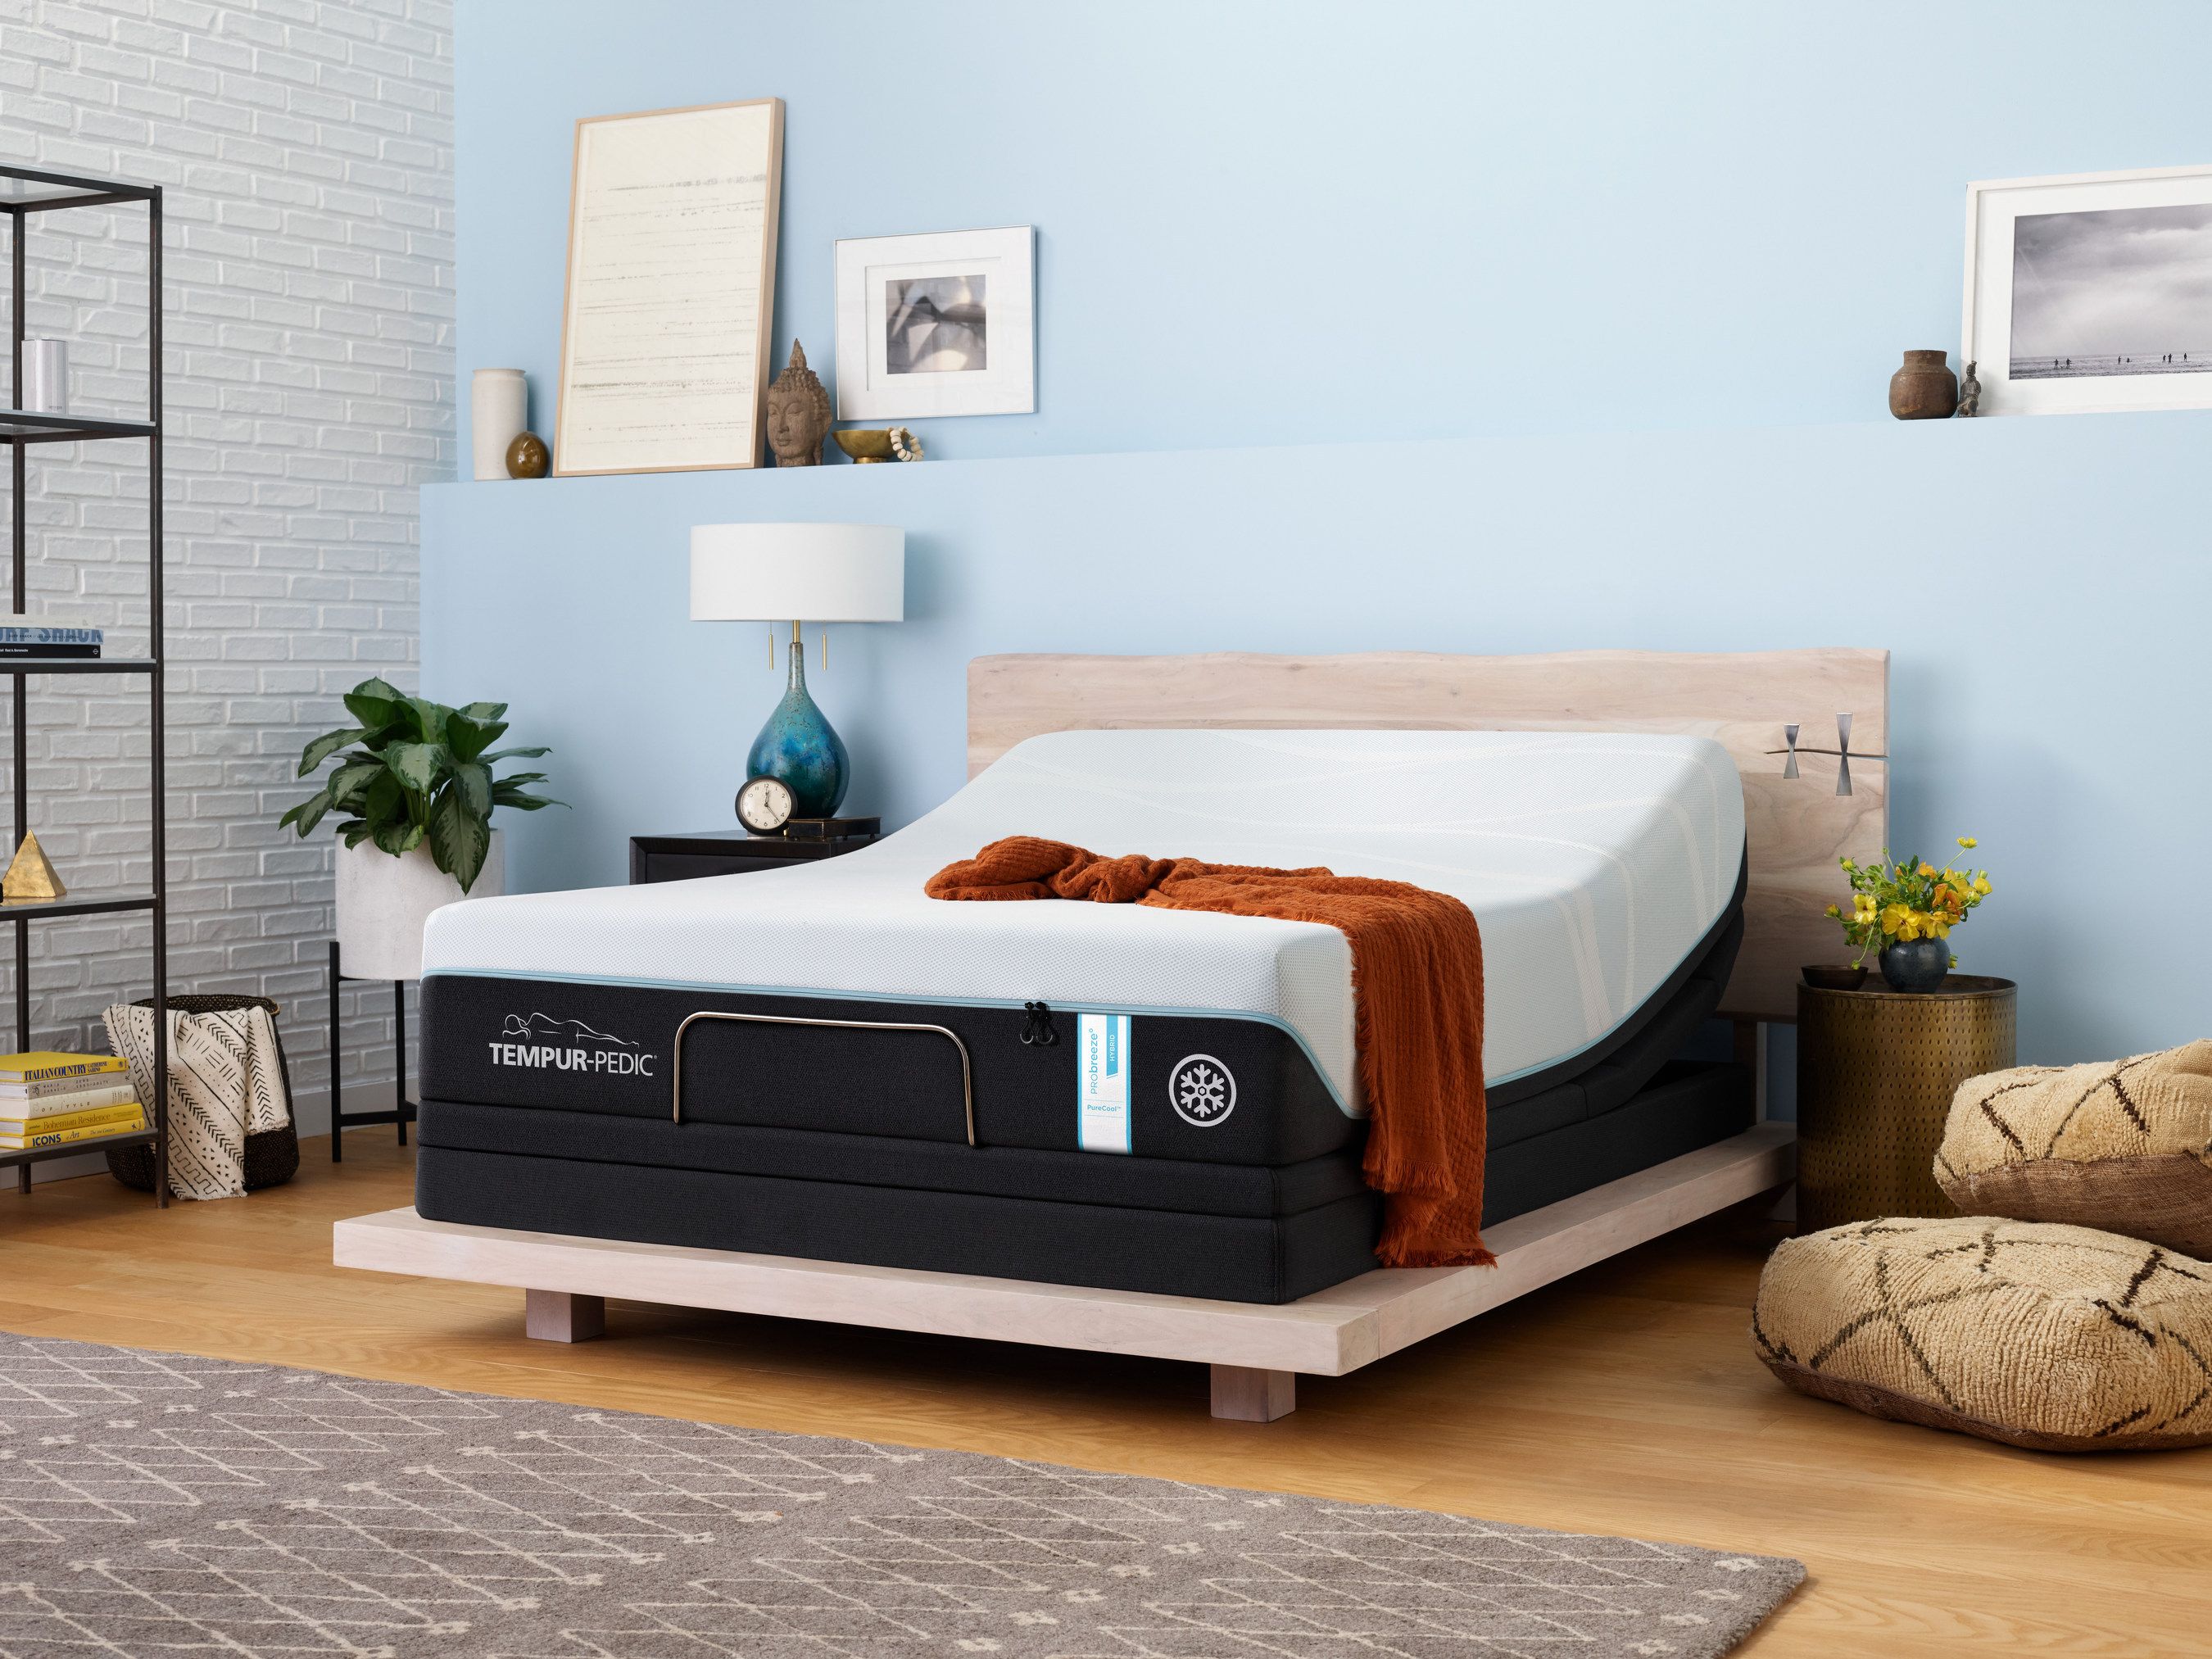 gastvrouw Leeg de prullenbak exegese Everything You Need To Know Before Buying The Tempur-Pedic LUXEbreeze  Mattress - Tempur-Pedic LUXEbreeze Mattress Review